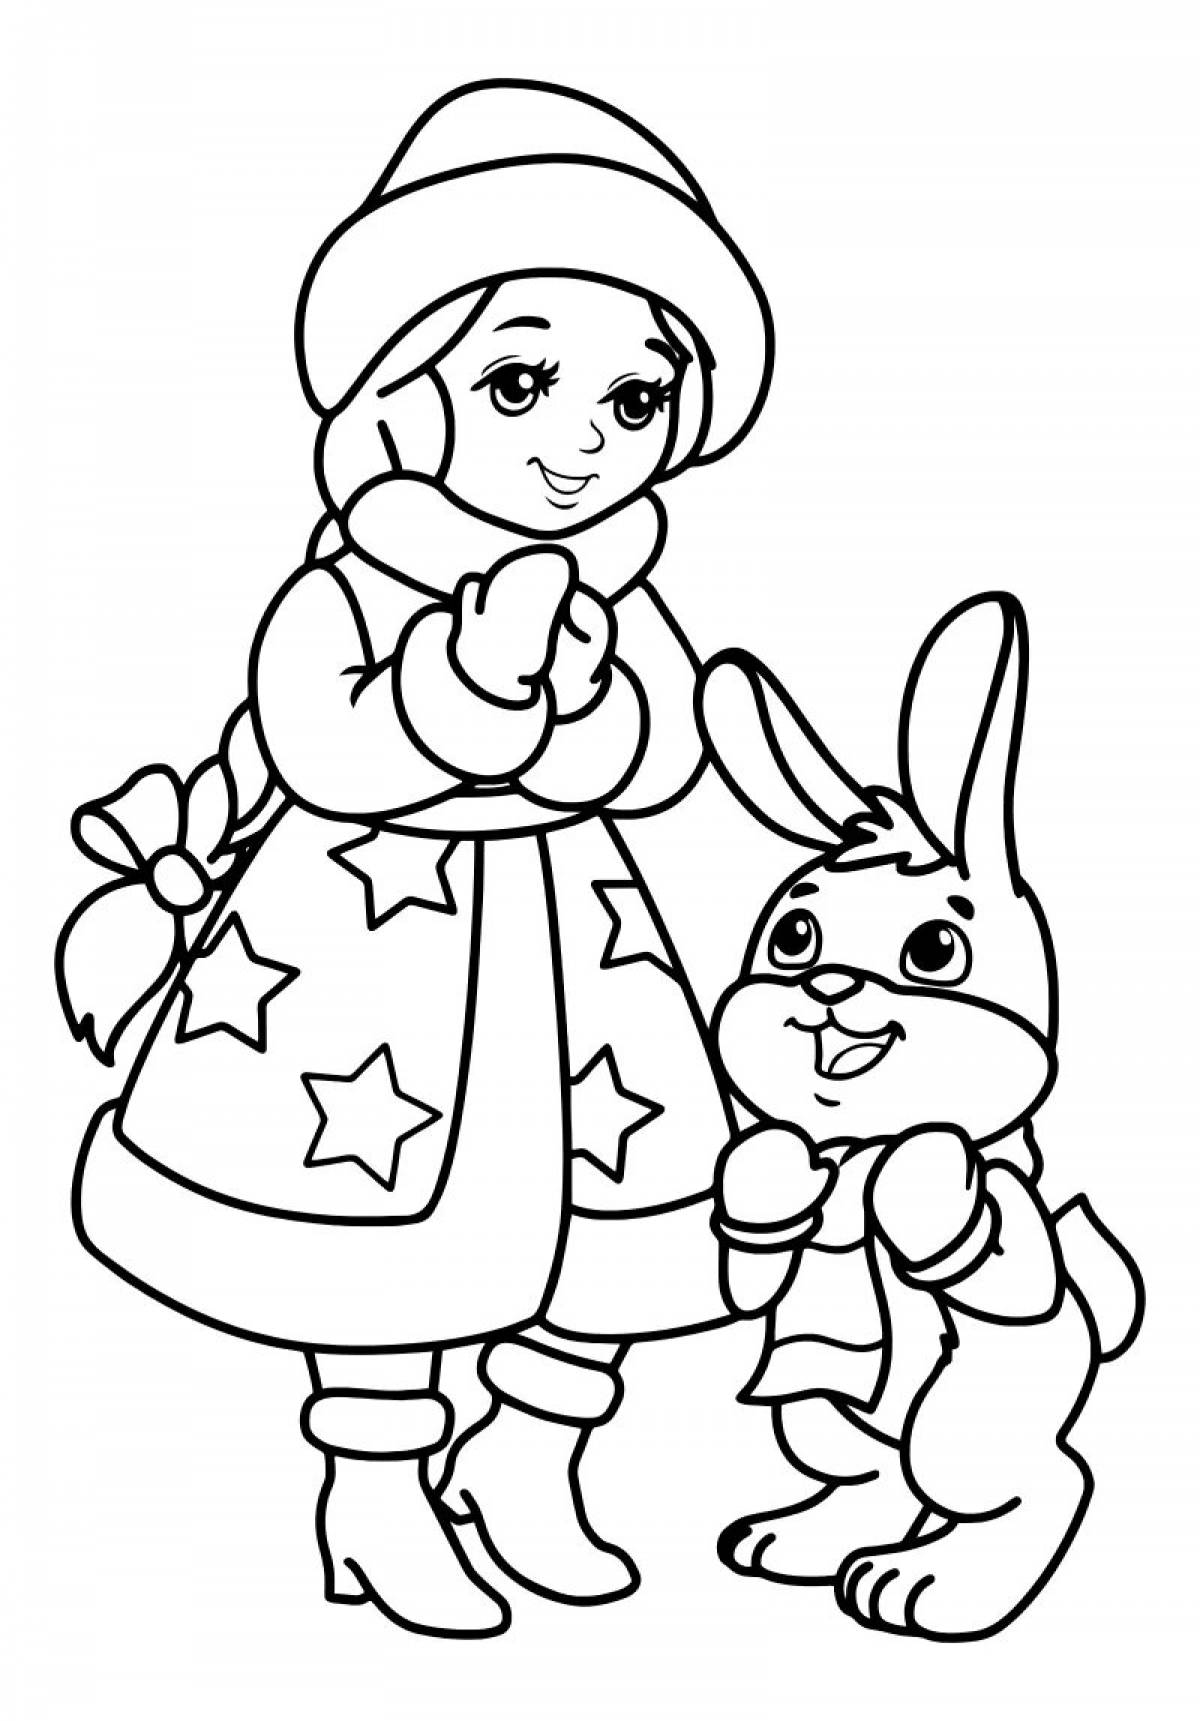 Glowing coloring book for girls snow maiden